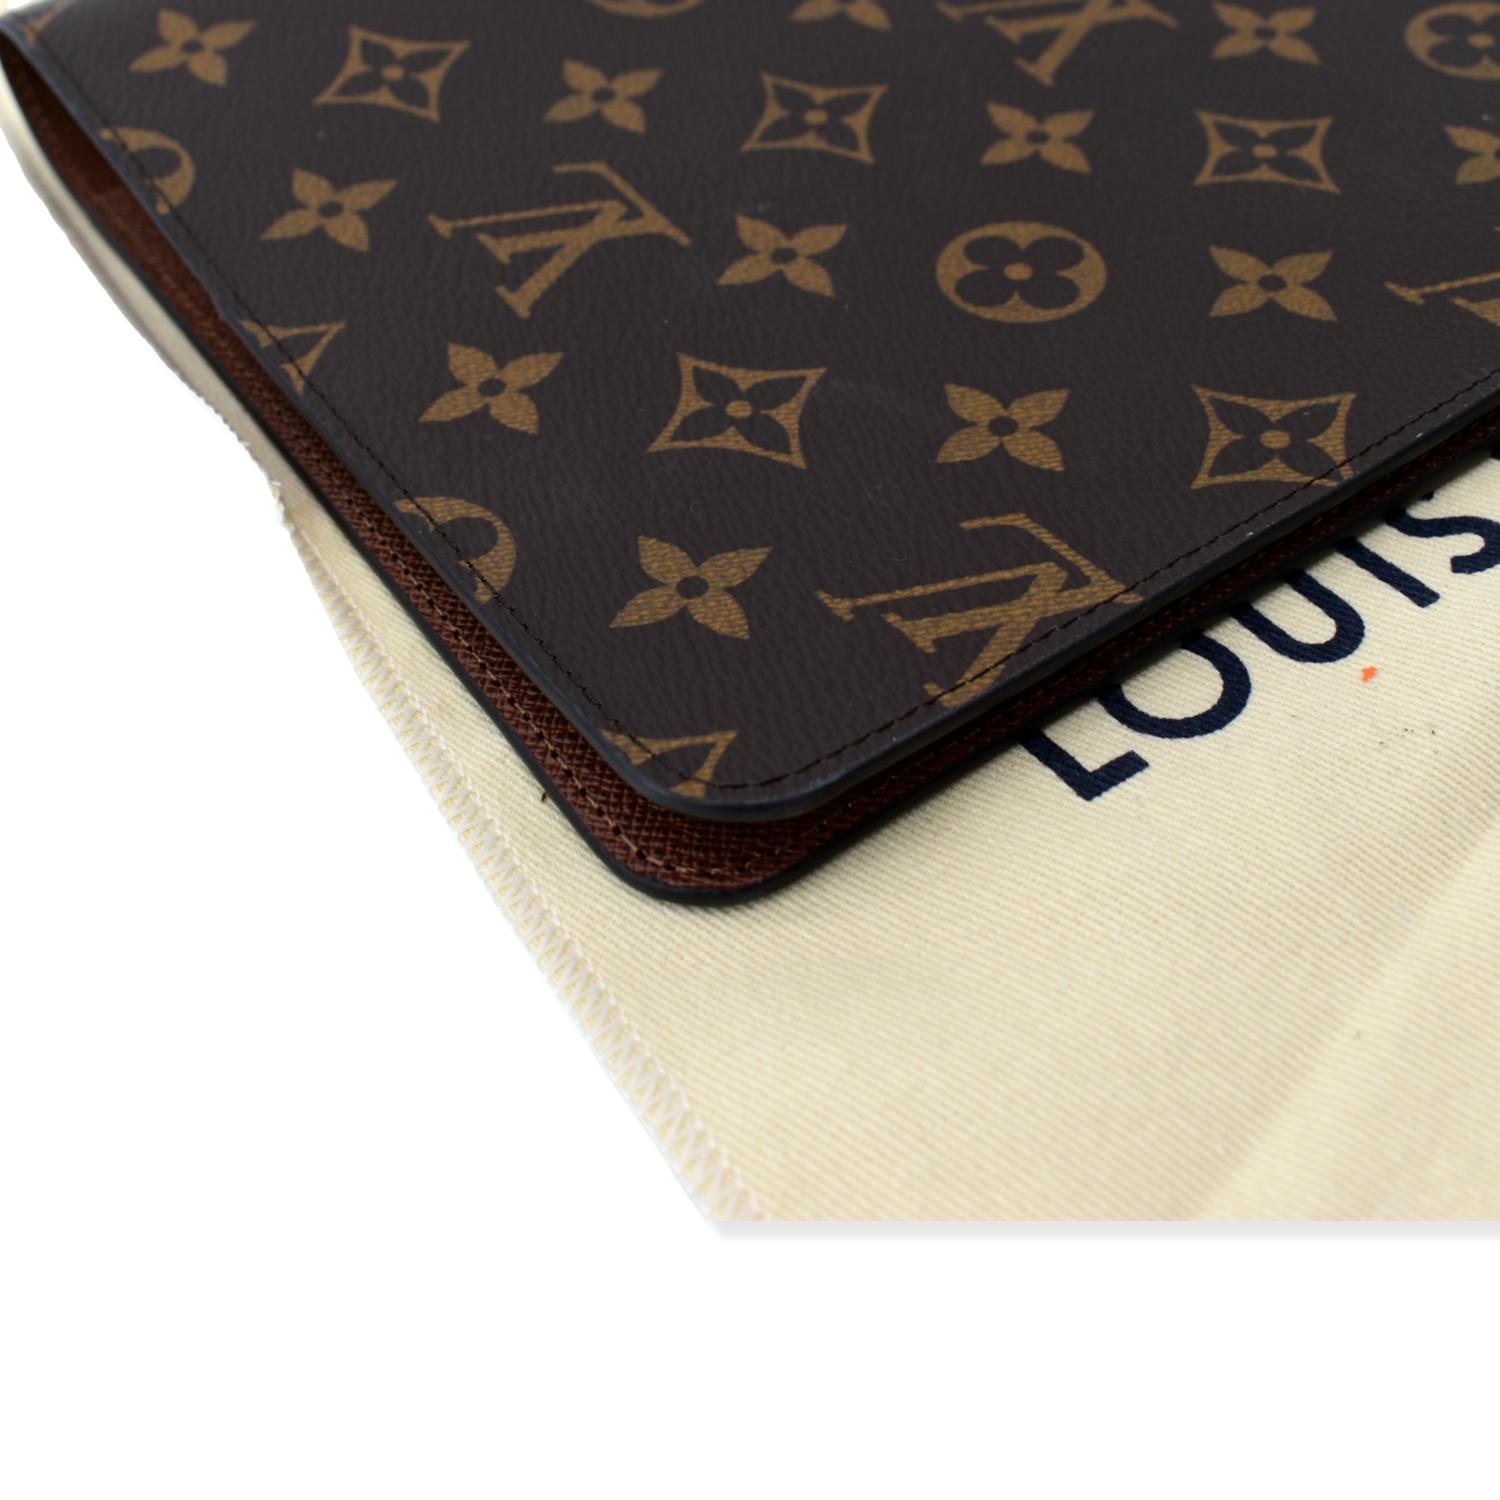 Louis Vuitton Monogram Alkitab (Indian Bible) Cover With Small Indexed Bible の公認海外通販｜セカイモン